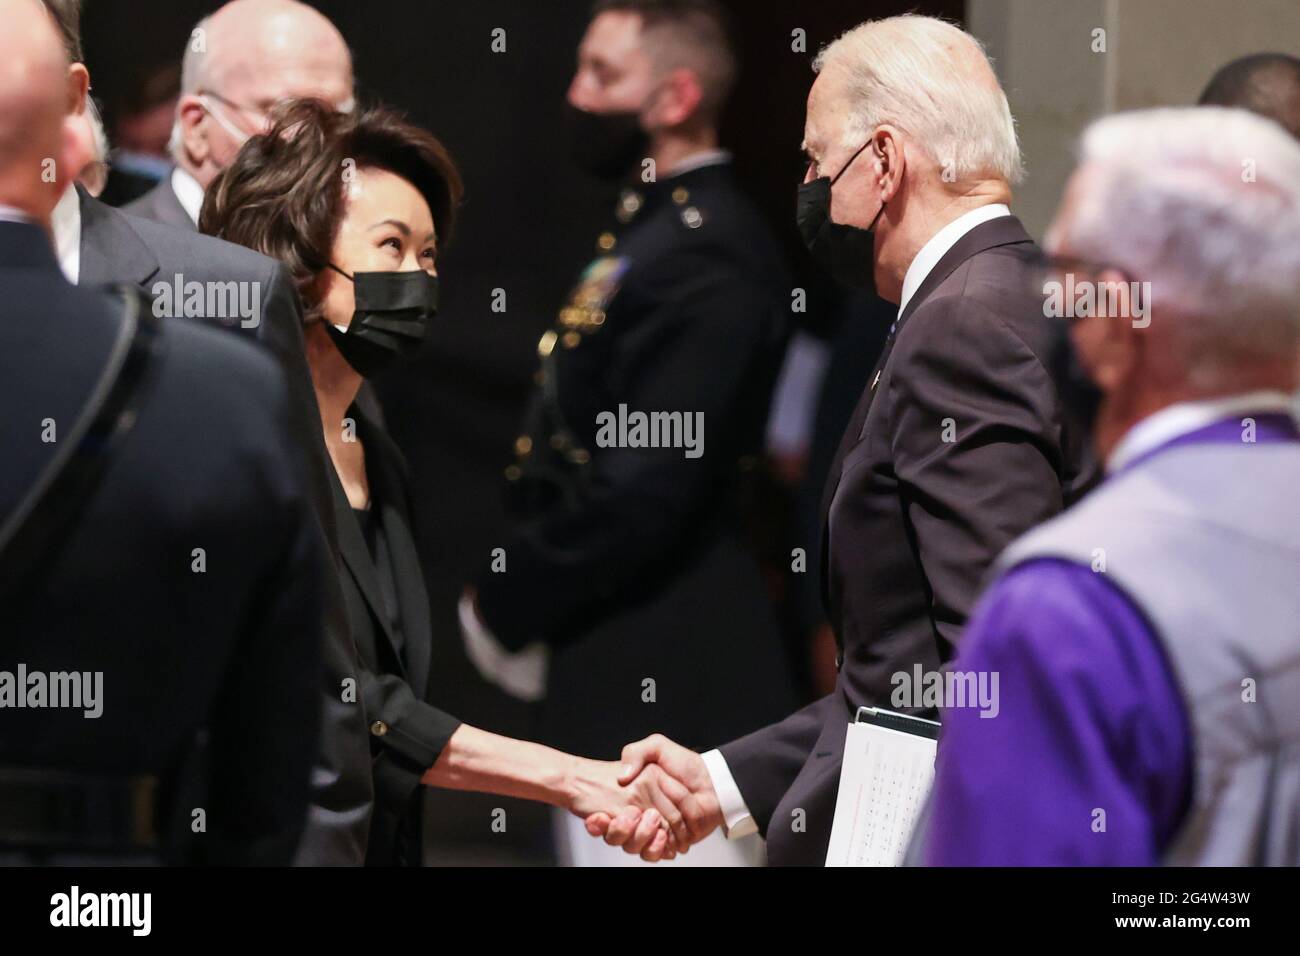 U.S. President Joe Biden shakes hands with Elaine Chao after the funeral ceremony of former Senator John Warner at Washington National Cathedral in Washington, DC, U.S. June 23, 2021. Oliver Contreras/Pool via REUTERS Stock Photo